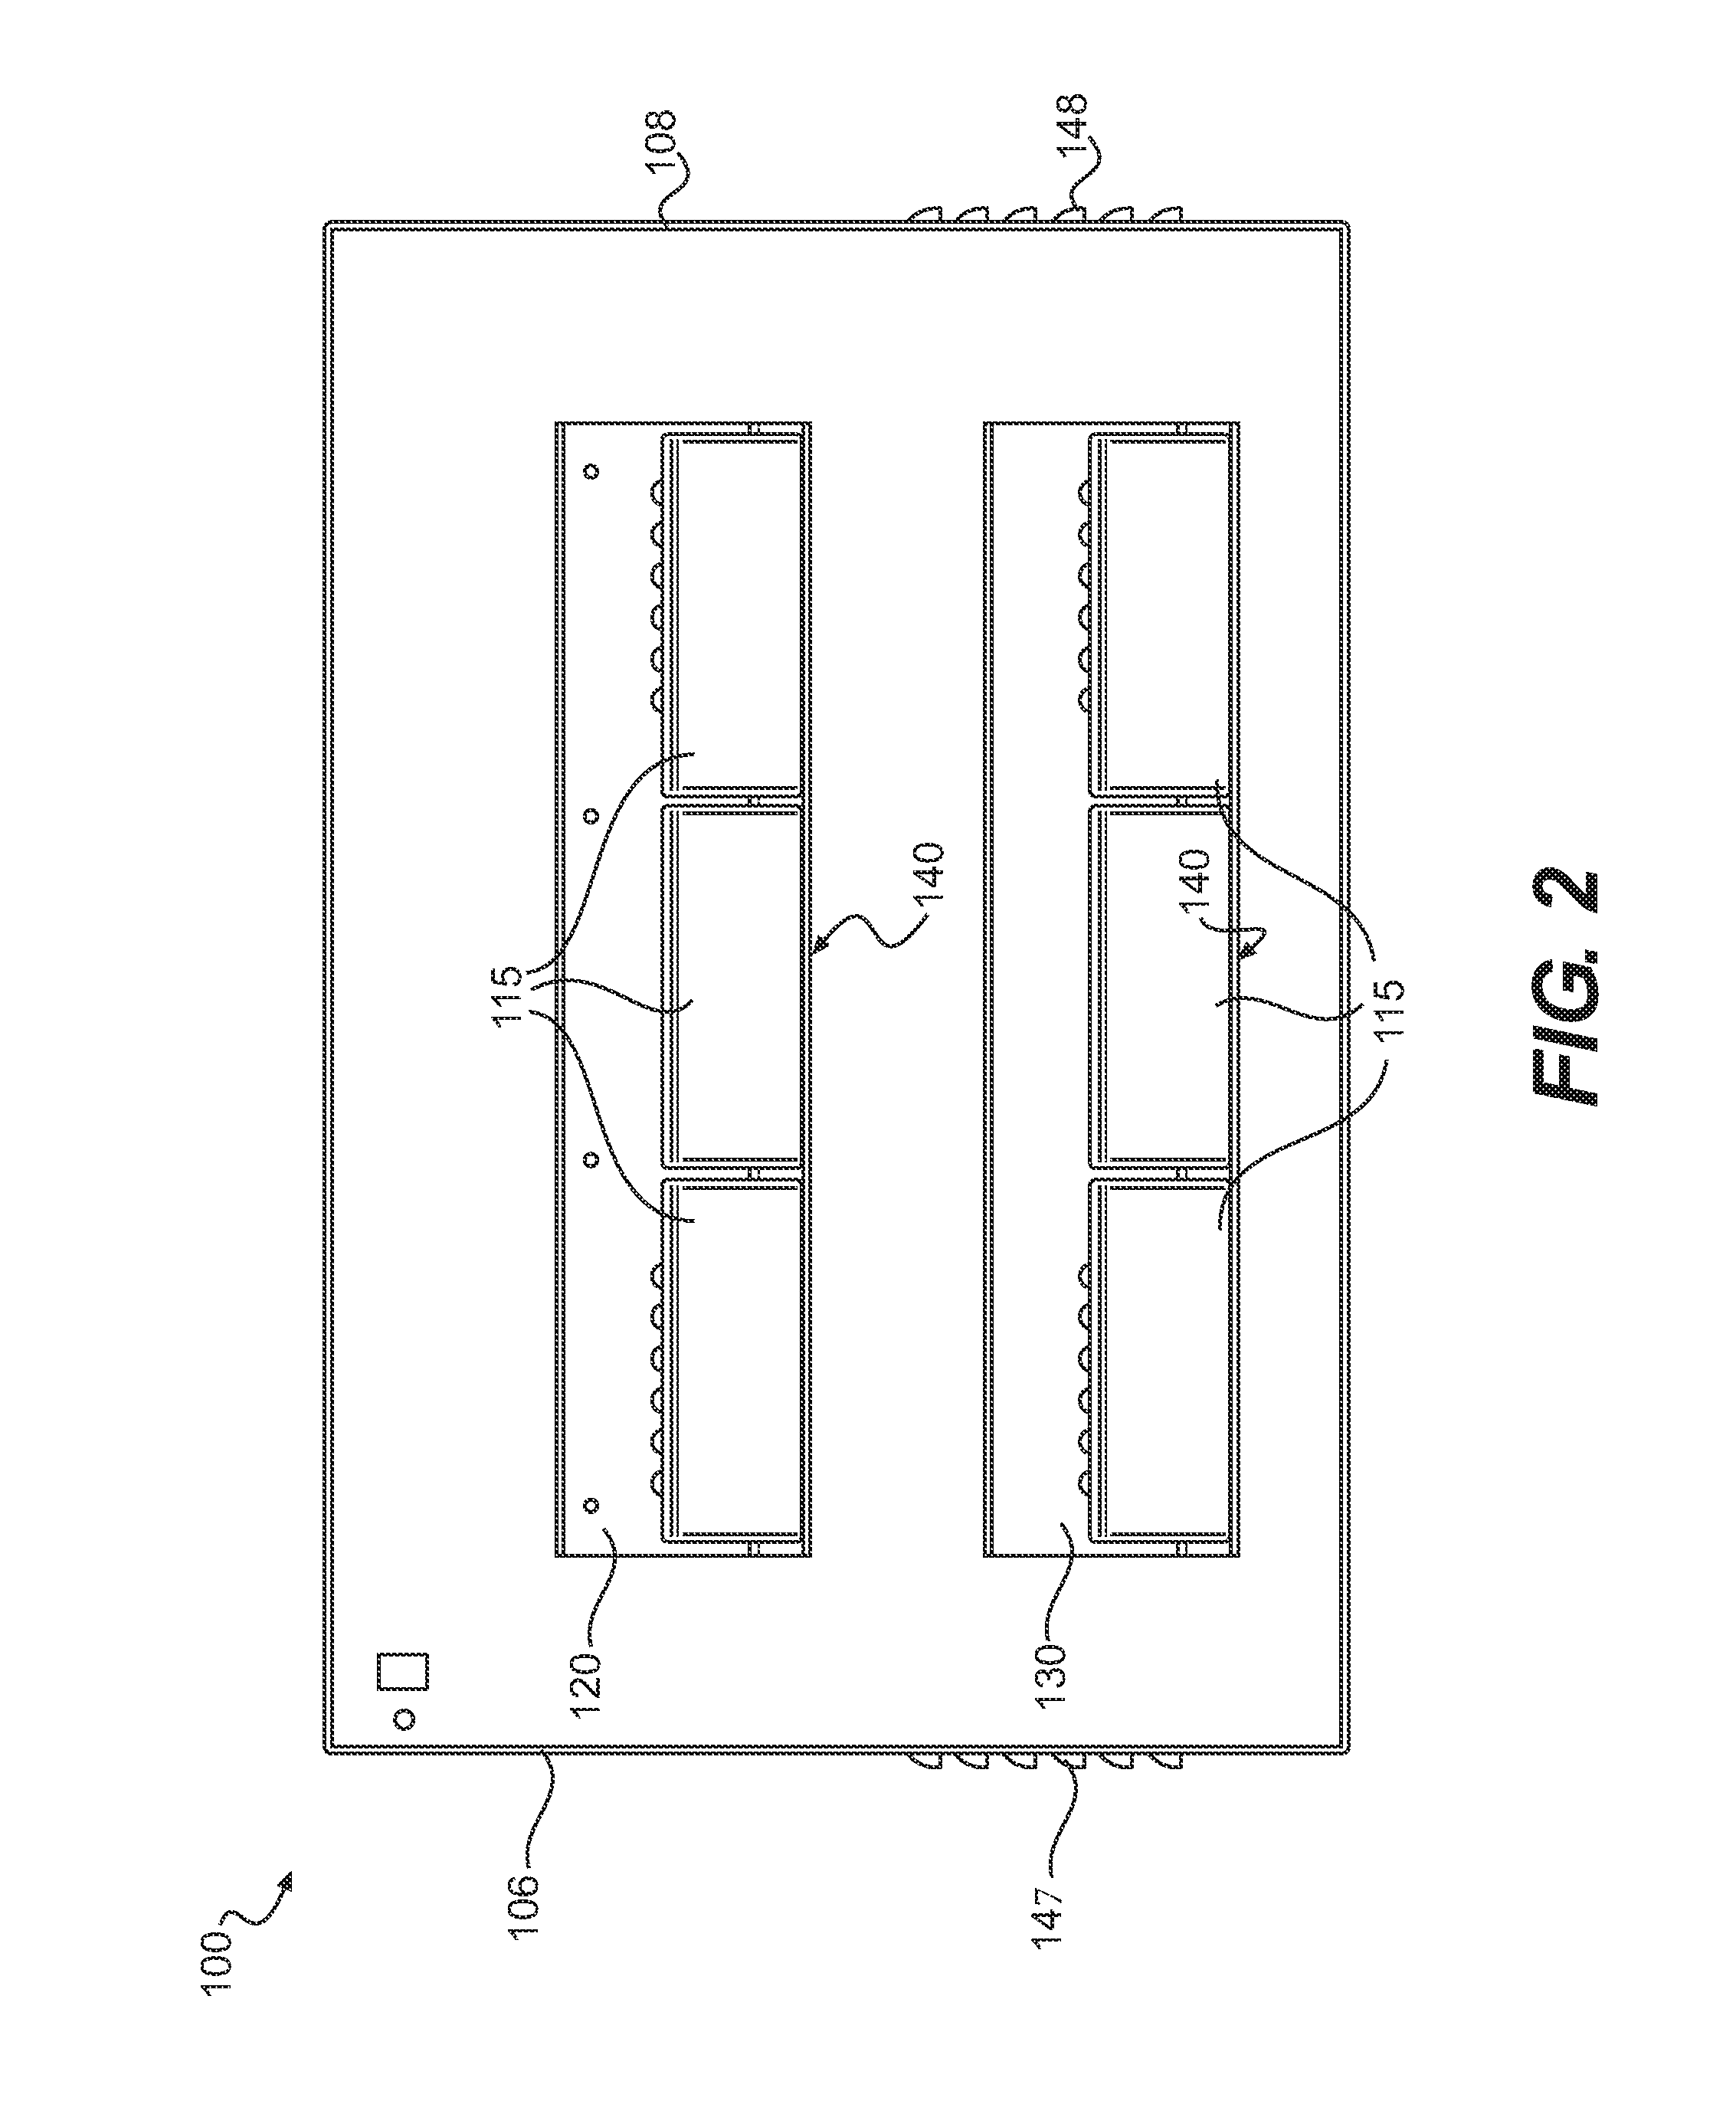 Holding cabinets, methods for controlling environmental conditions in holding cabinets, and computer-readable media storing instructions for implementing such methods